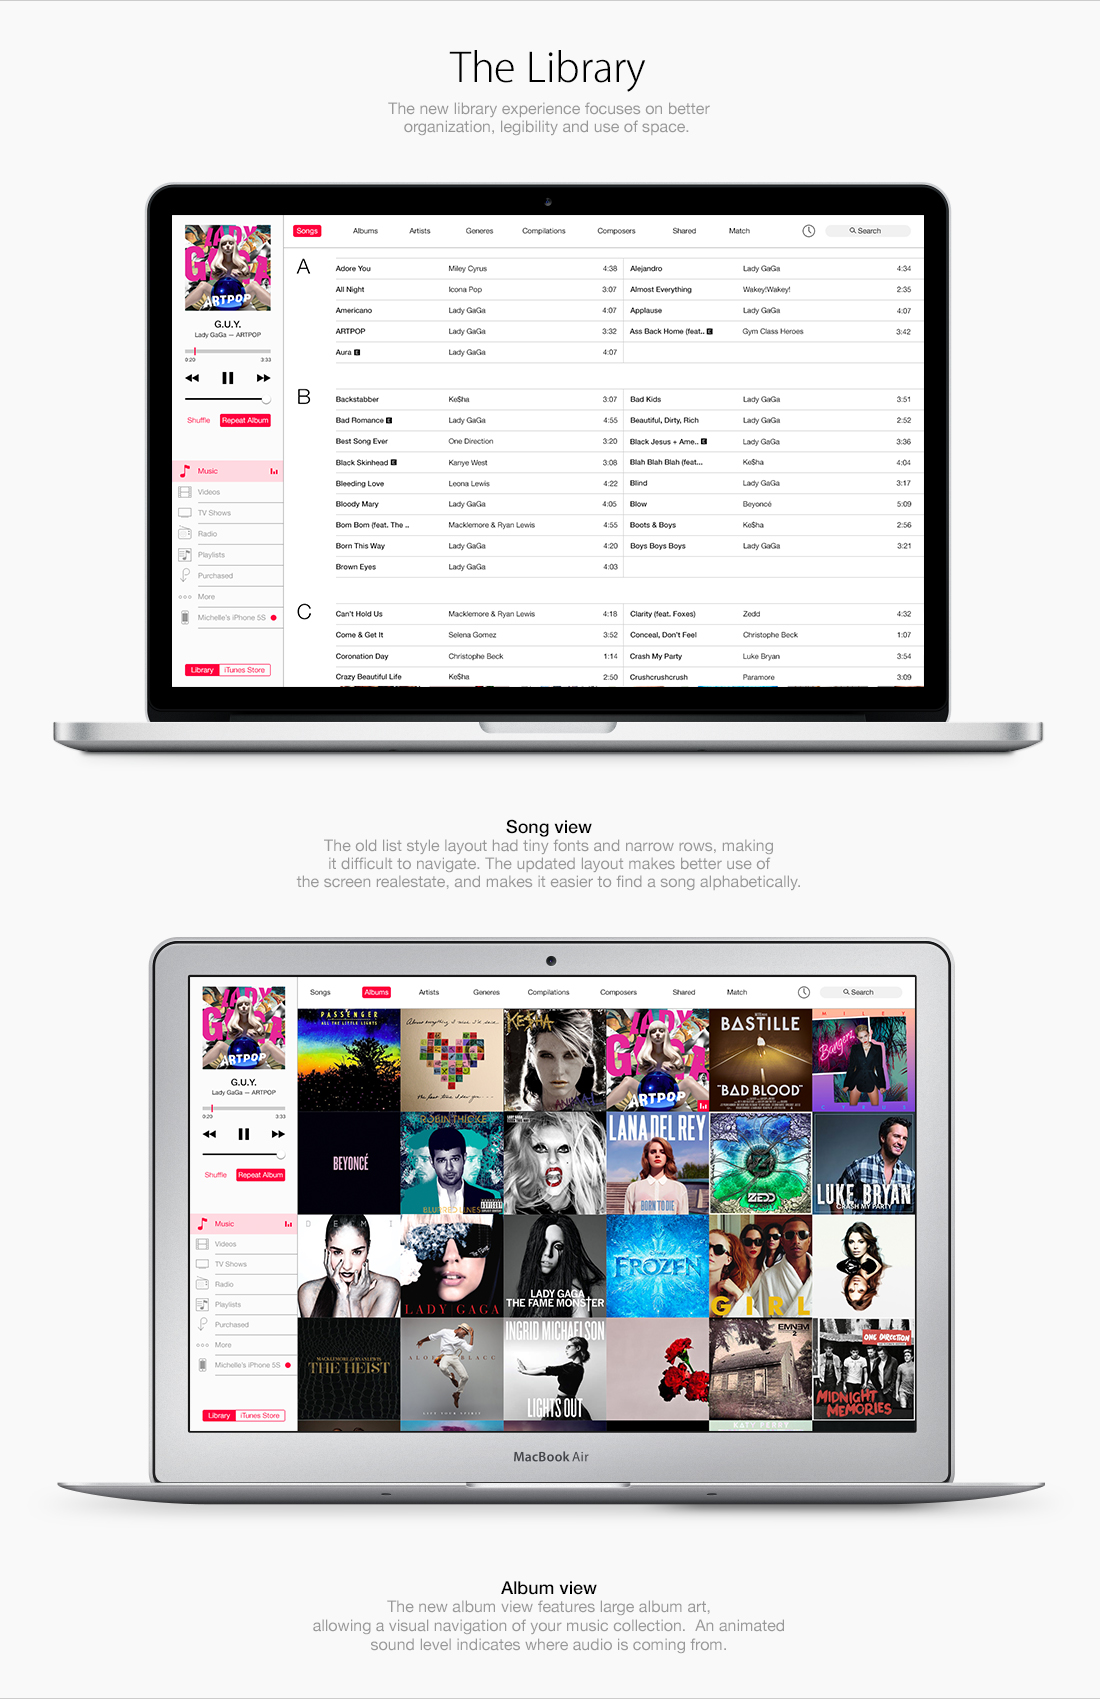 iTunes Redesign Inspired By iOS [Images]